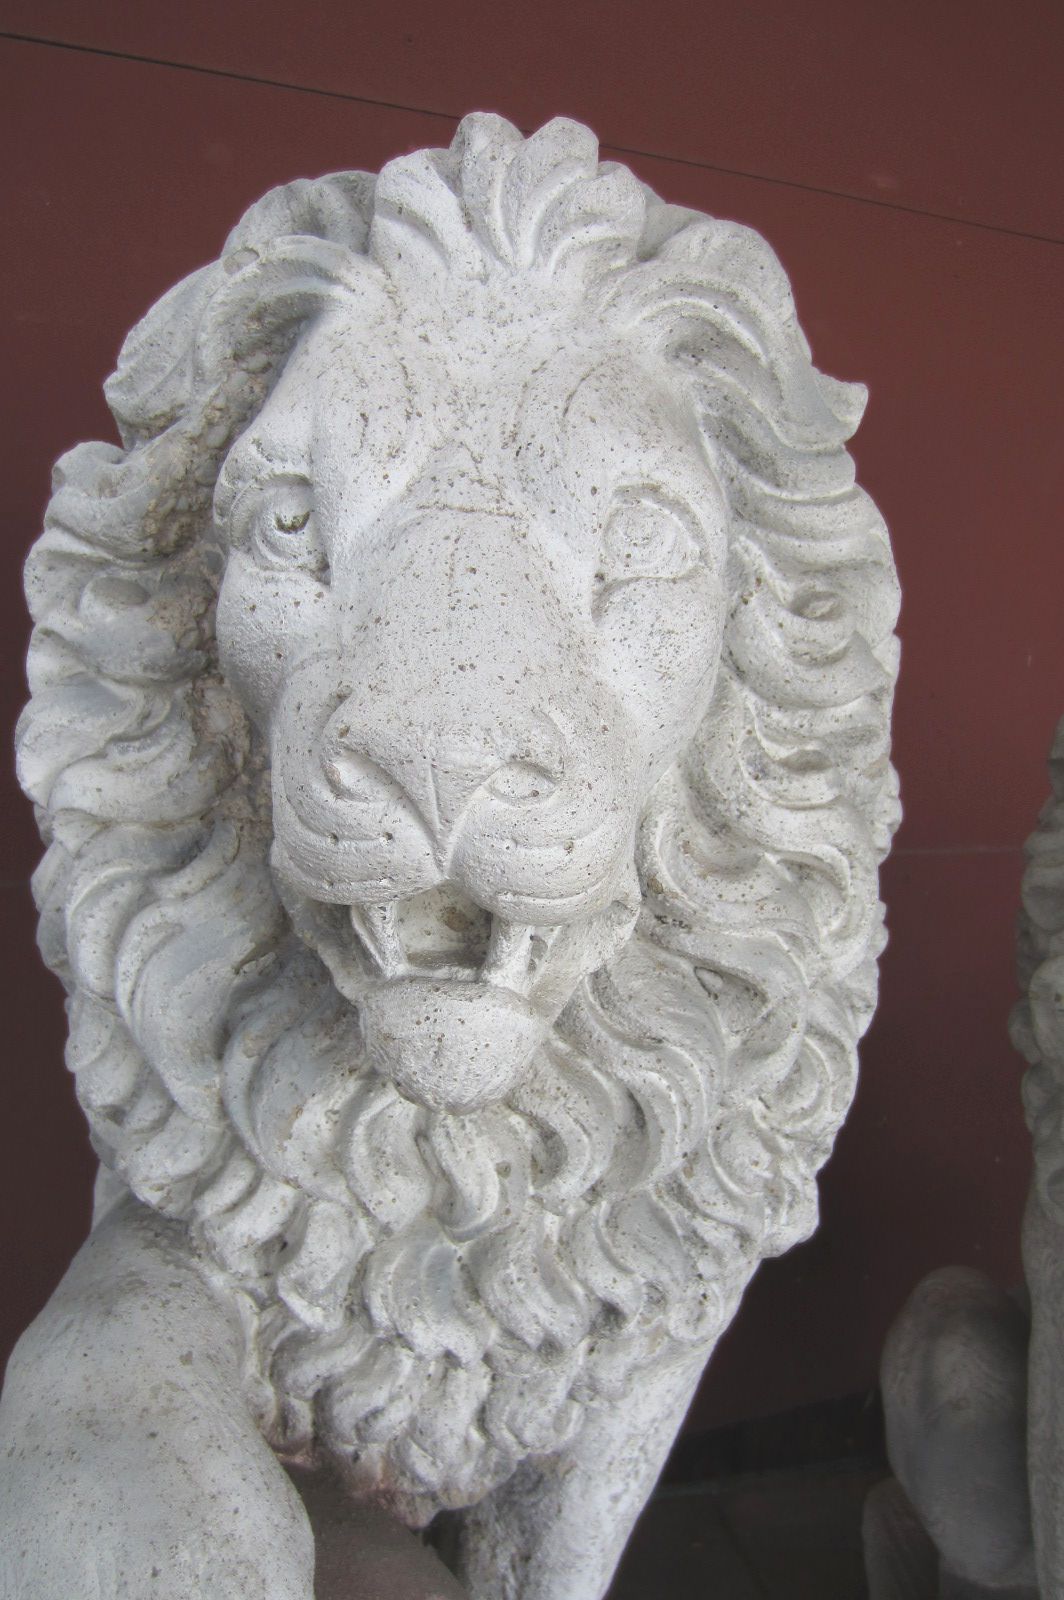 A pair of large antique lion sentinels.
Exceptional detail formed of solid cement. 
Over 3 feet tall and weighing 200lbs each.